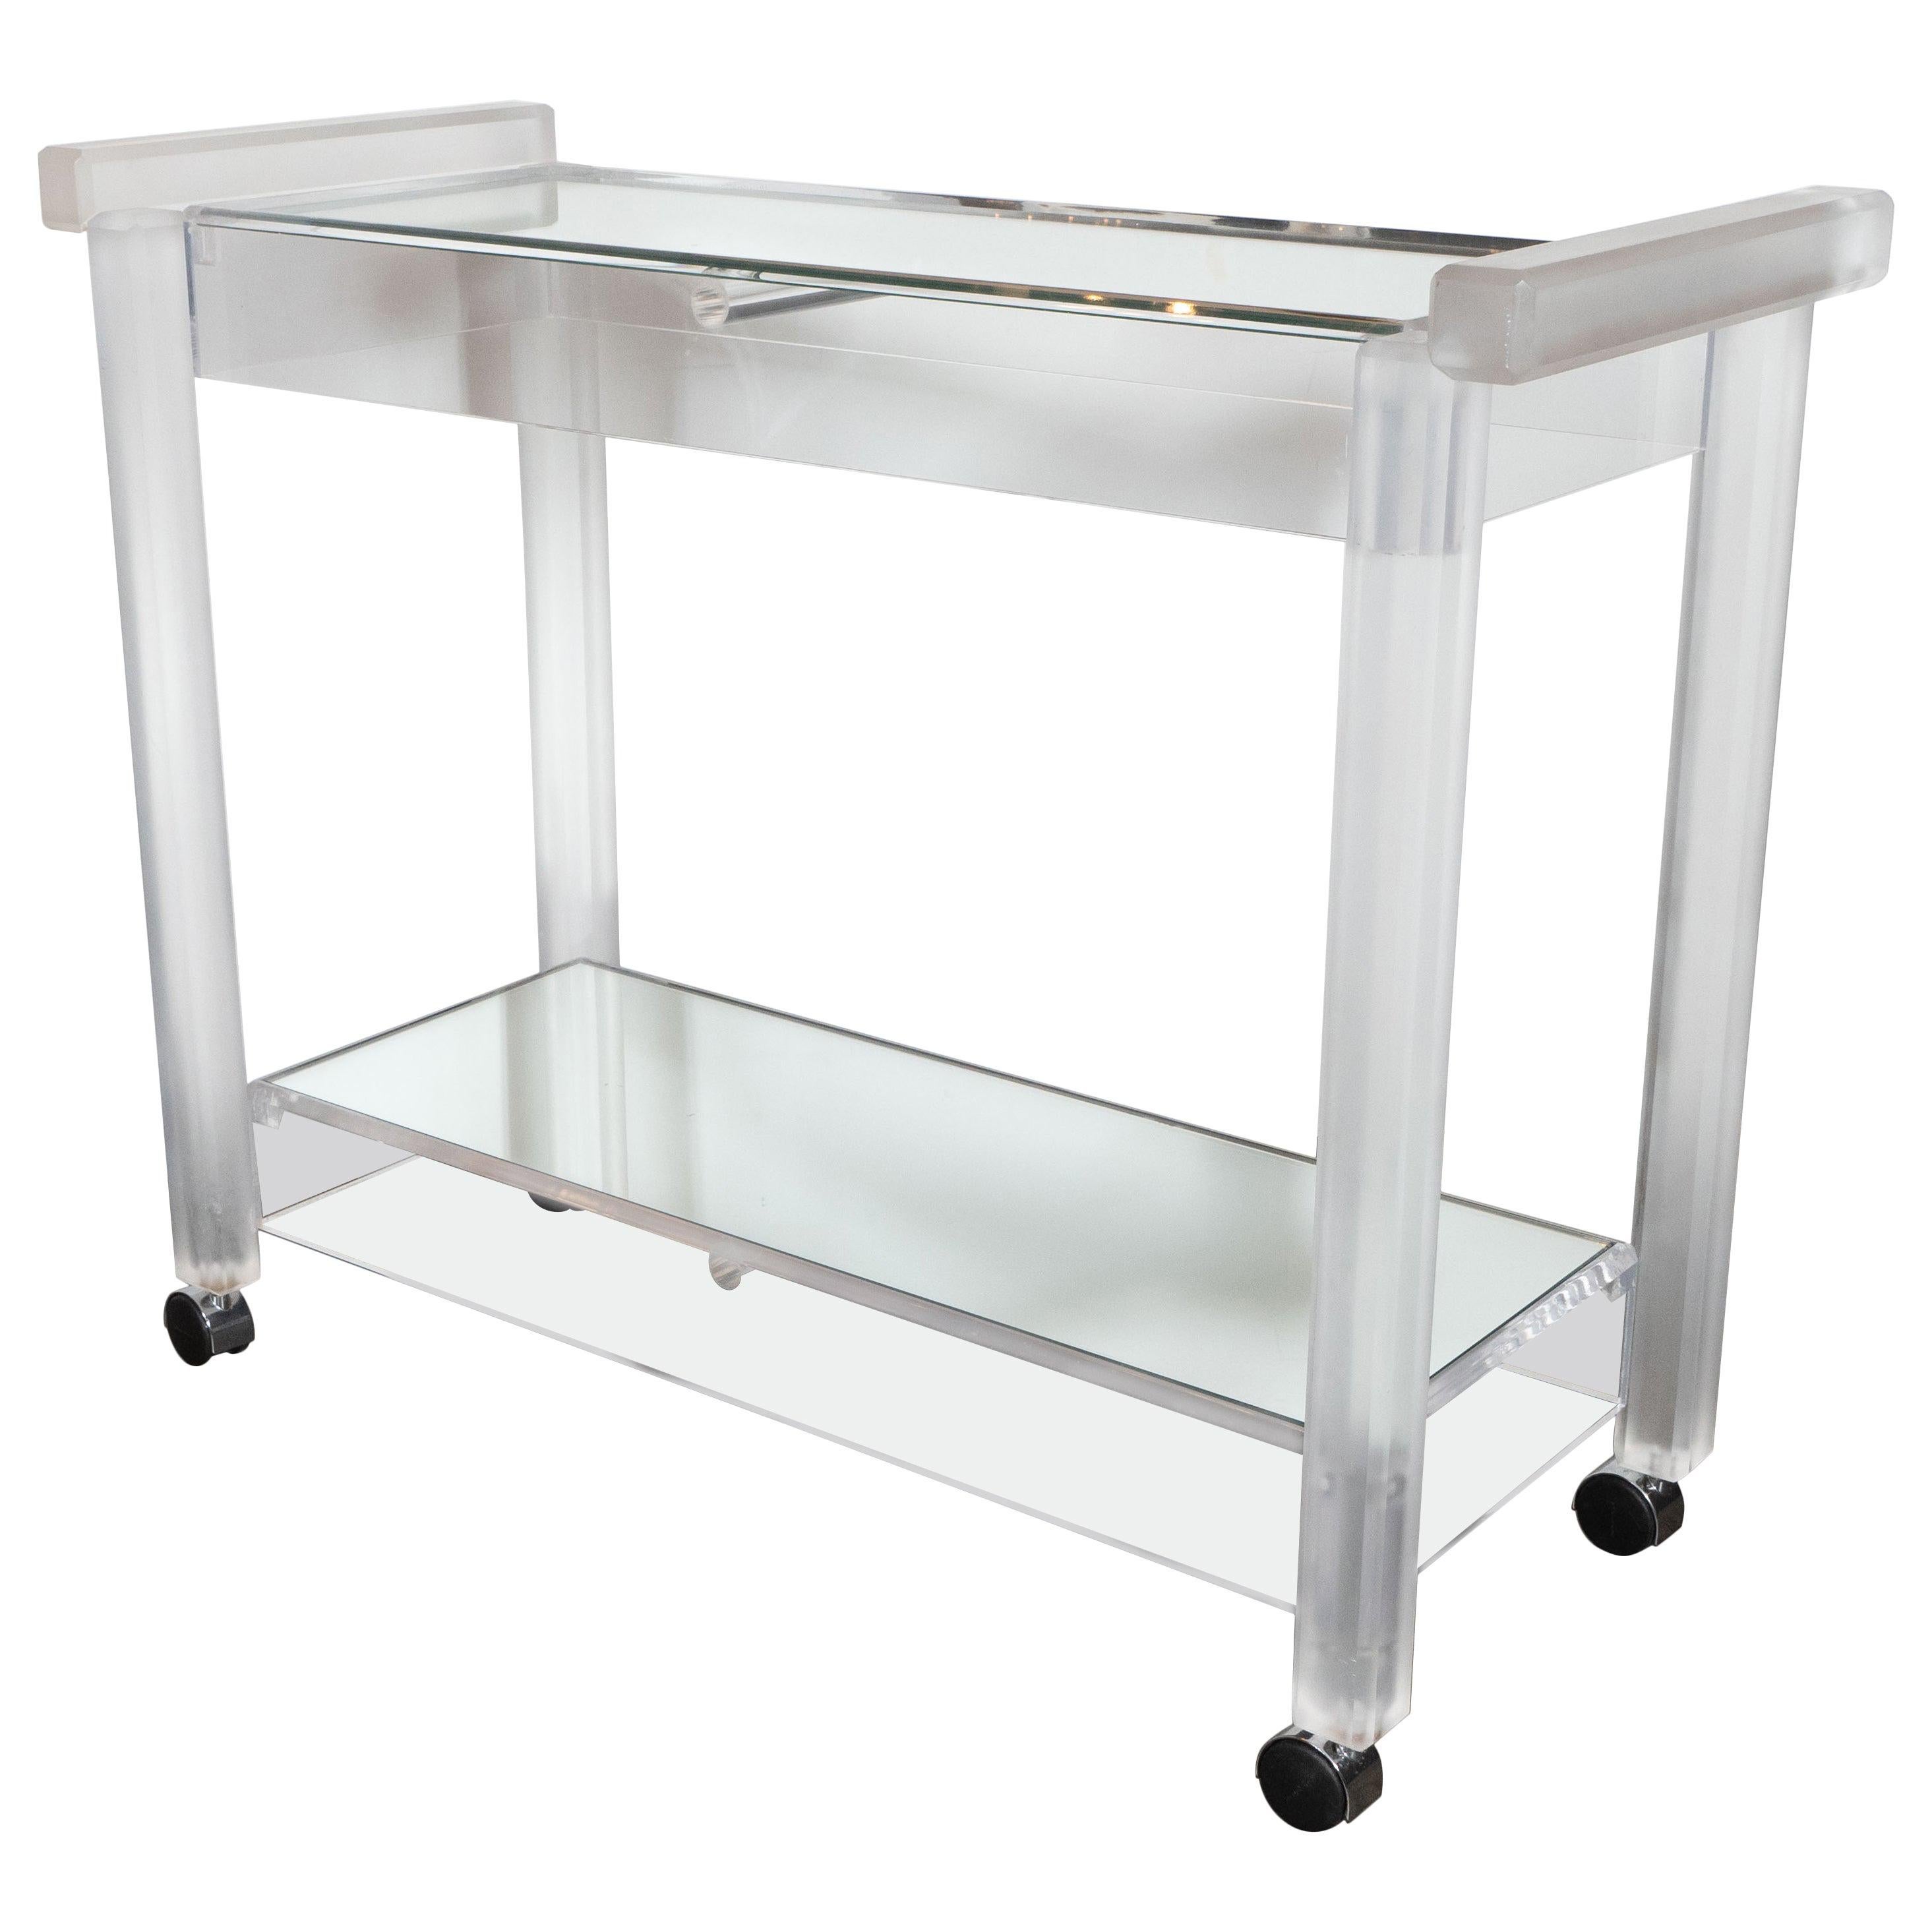 Mid-Century Modern Recilinear Mirrored Lucite Bar Cart by the Lion Frost Company